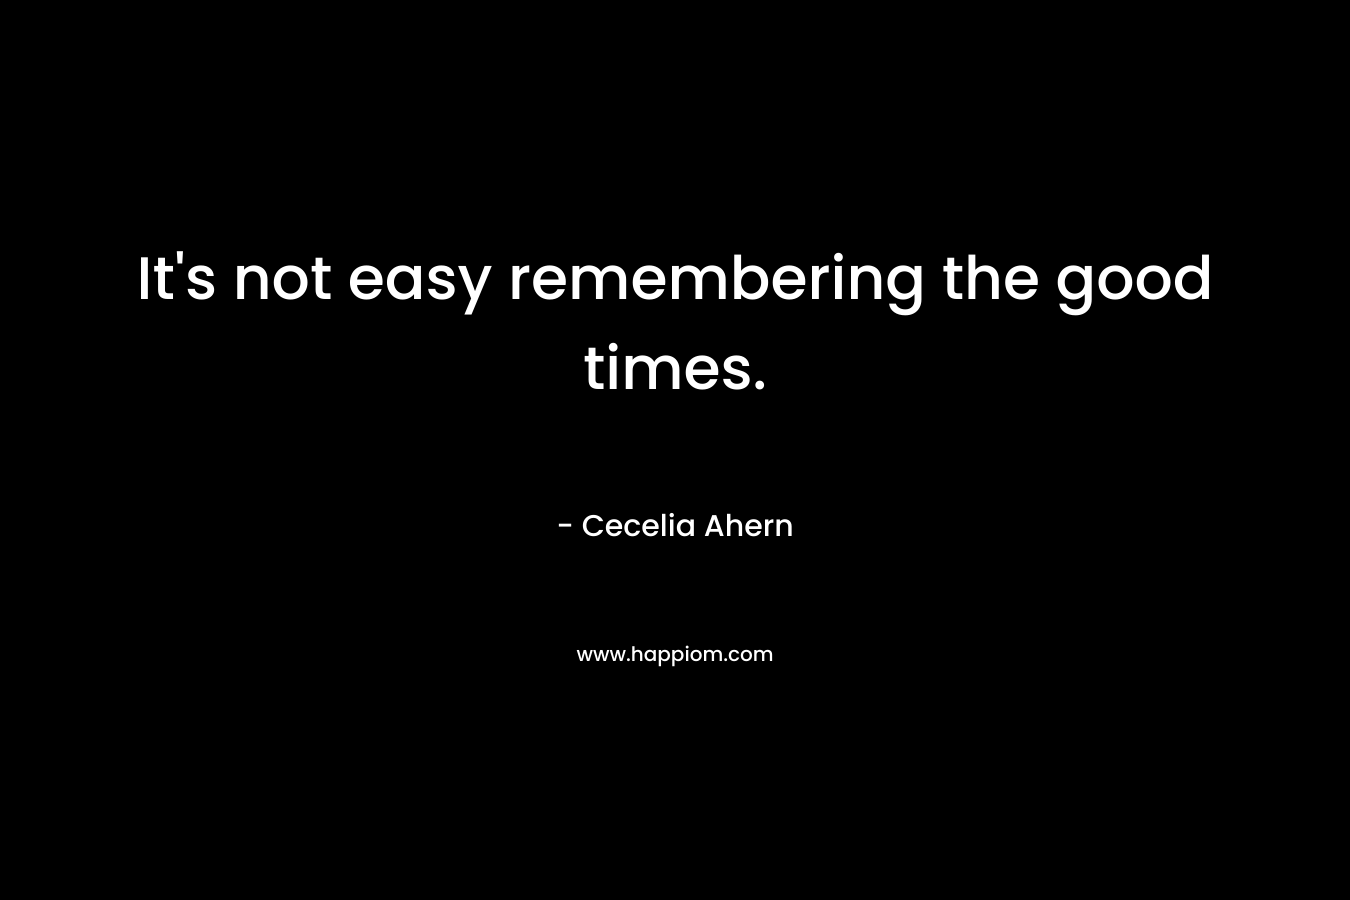 It’s not easy remembering the good times. – Cecelia Ahern